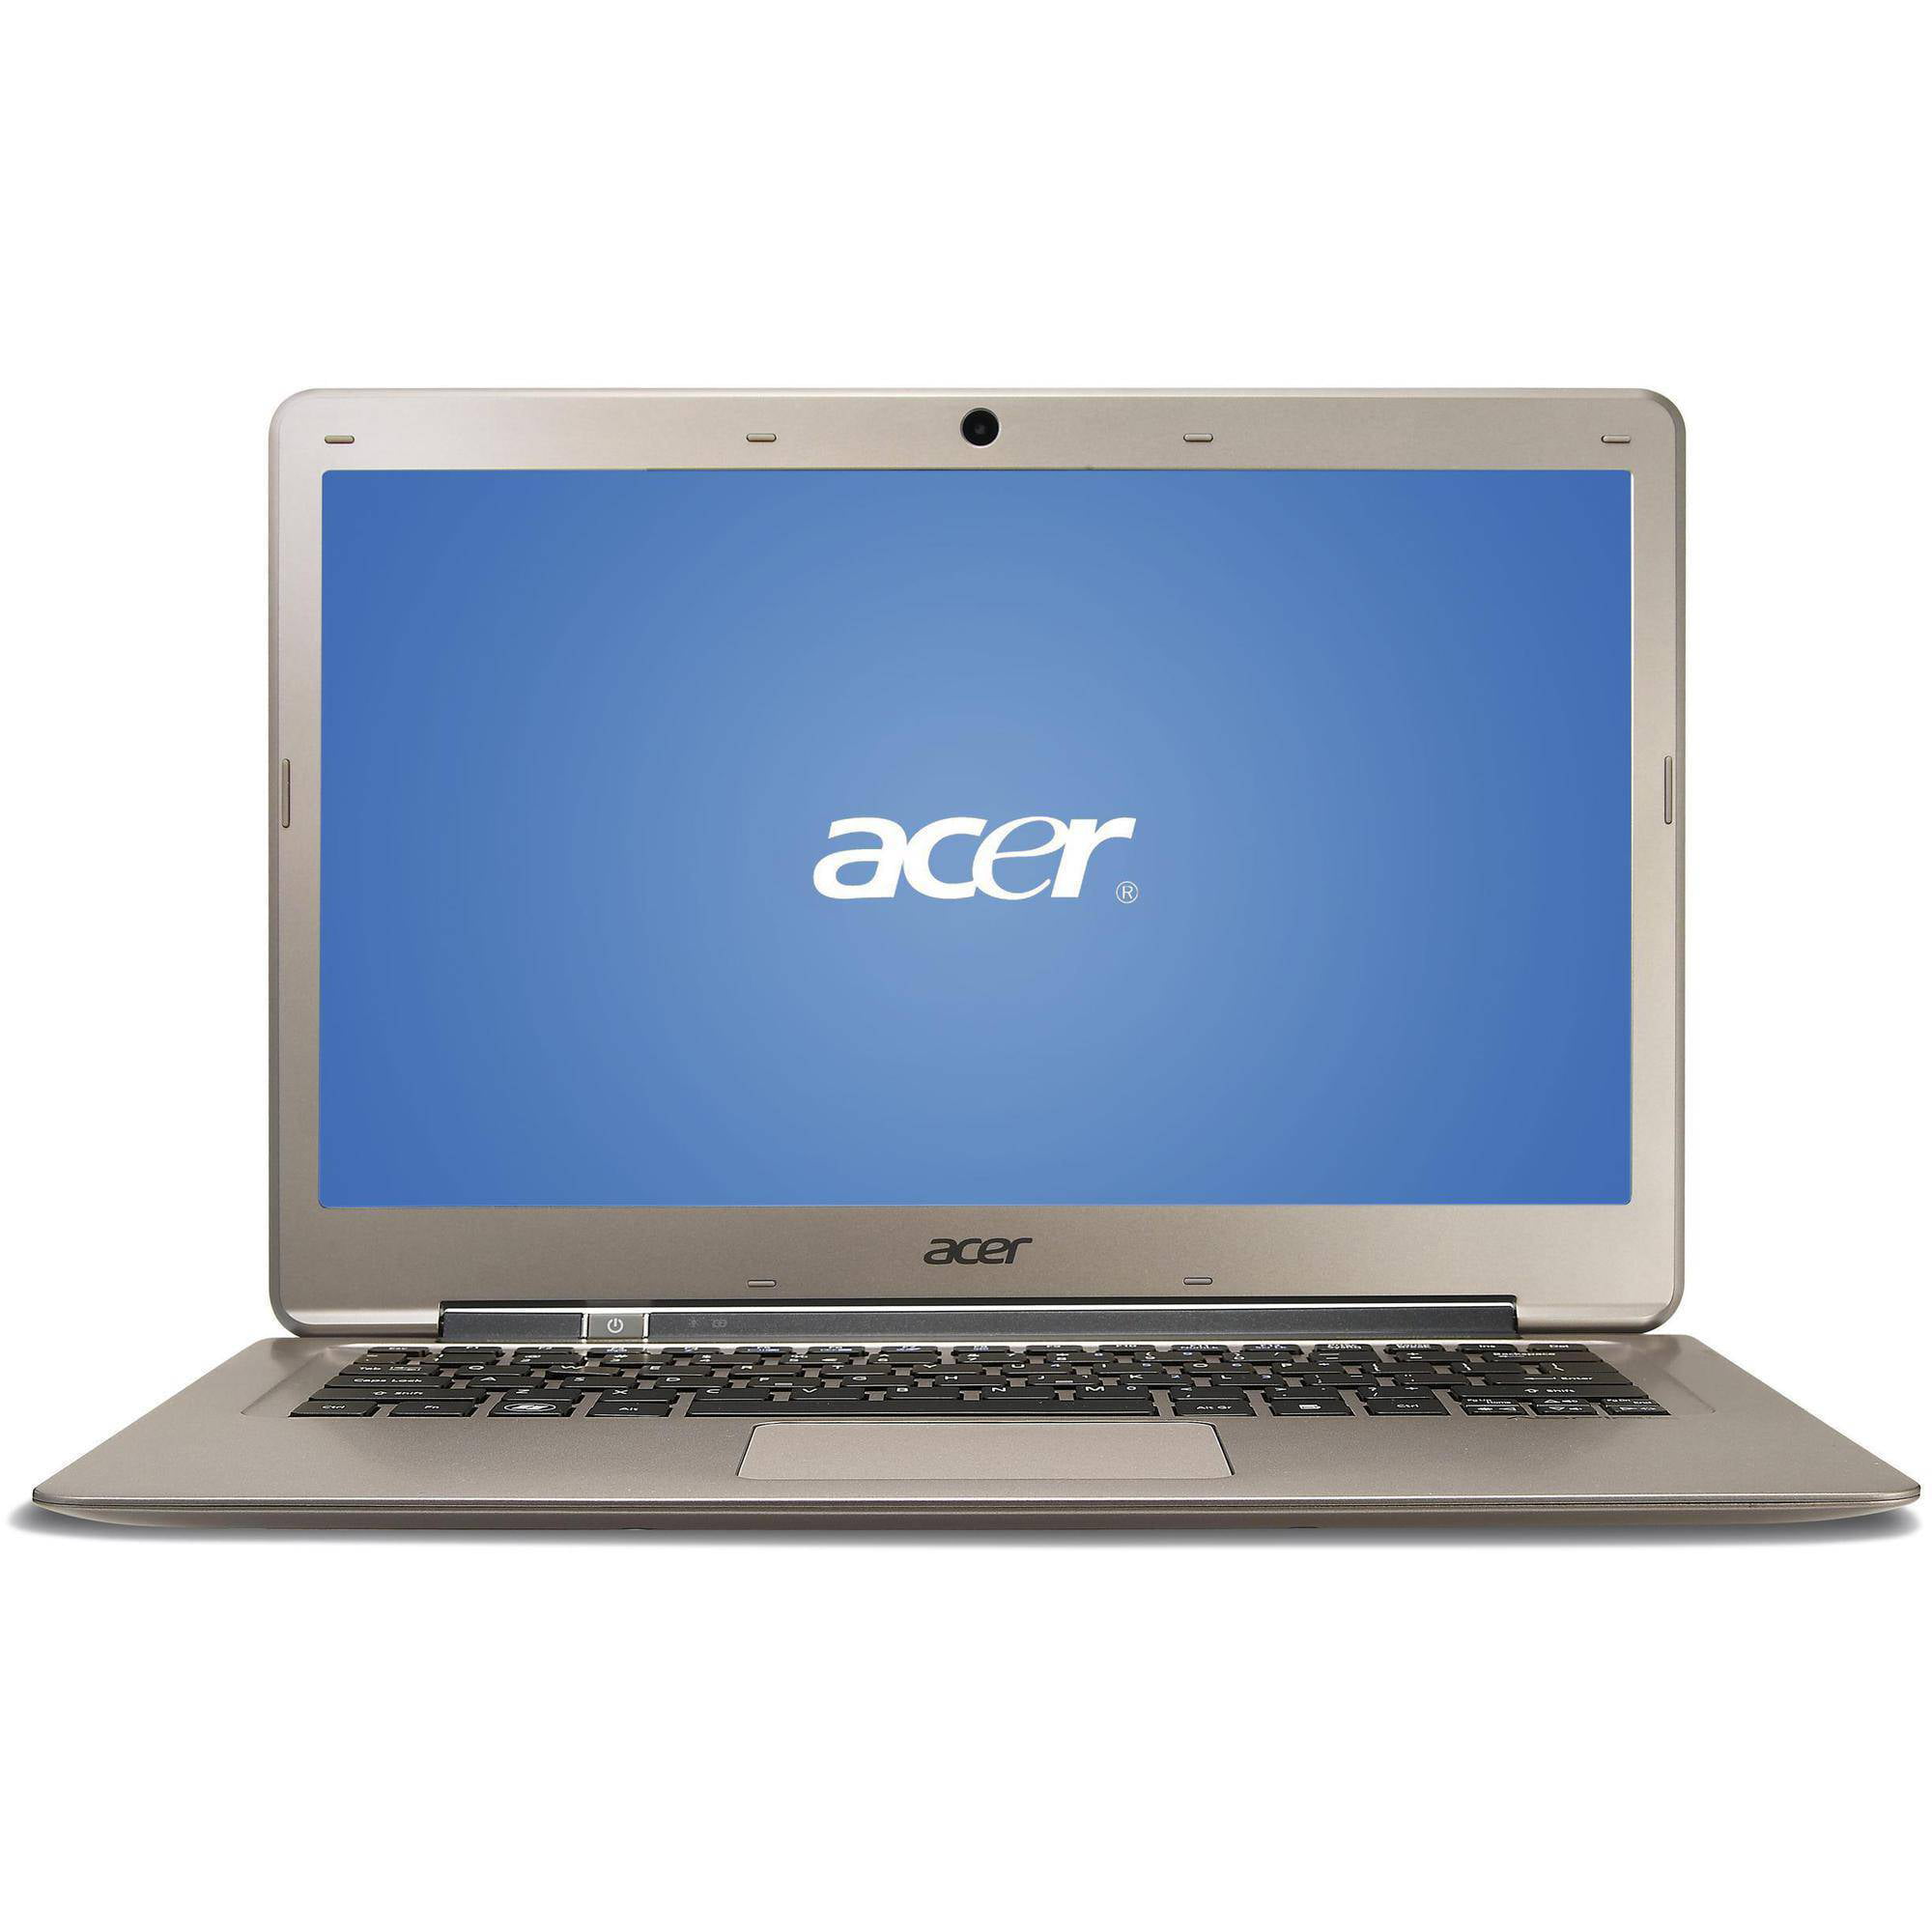 acer network drivers for windows 10 free download